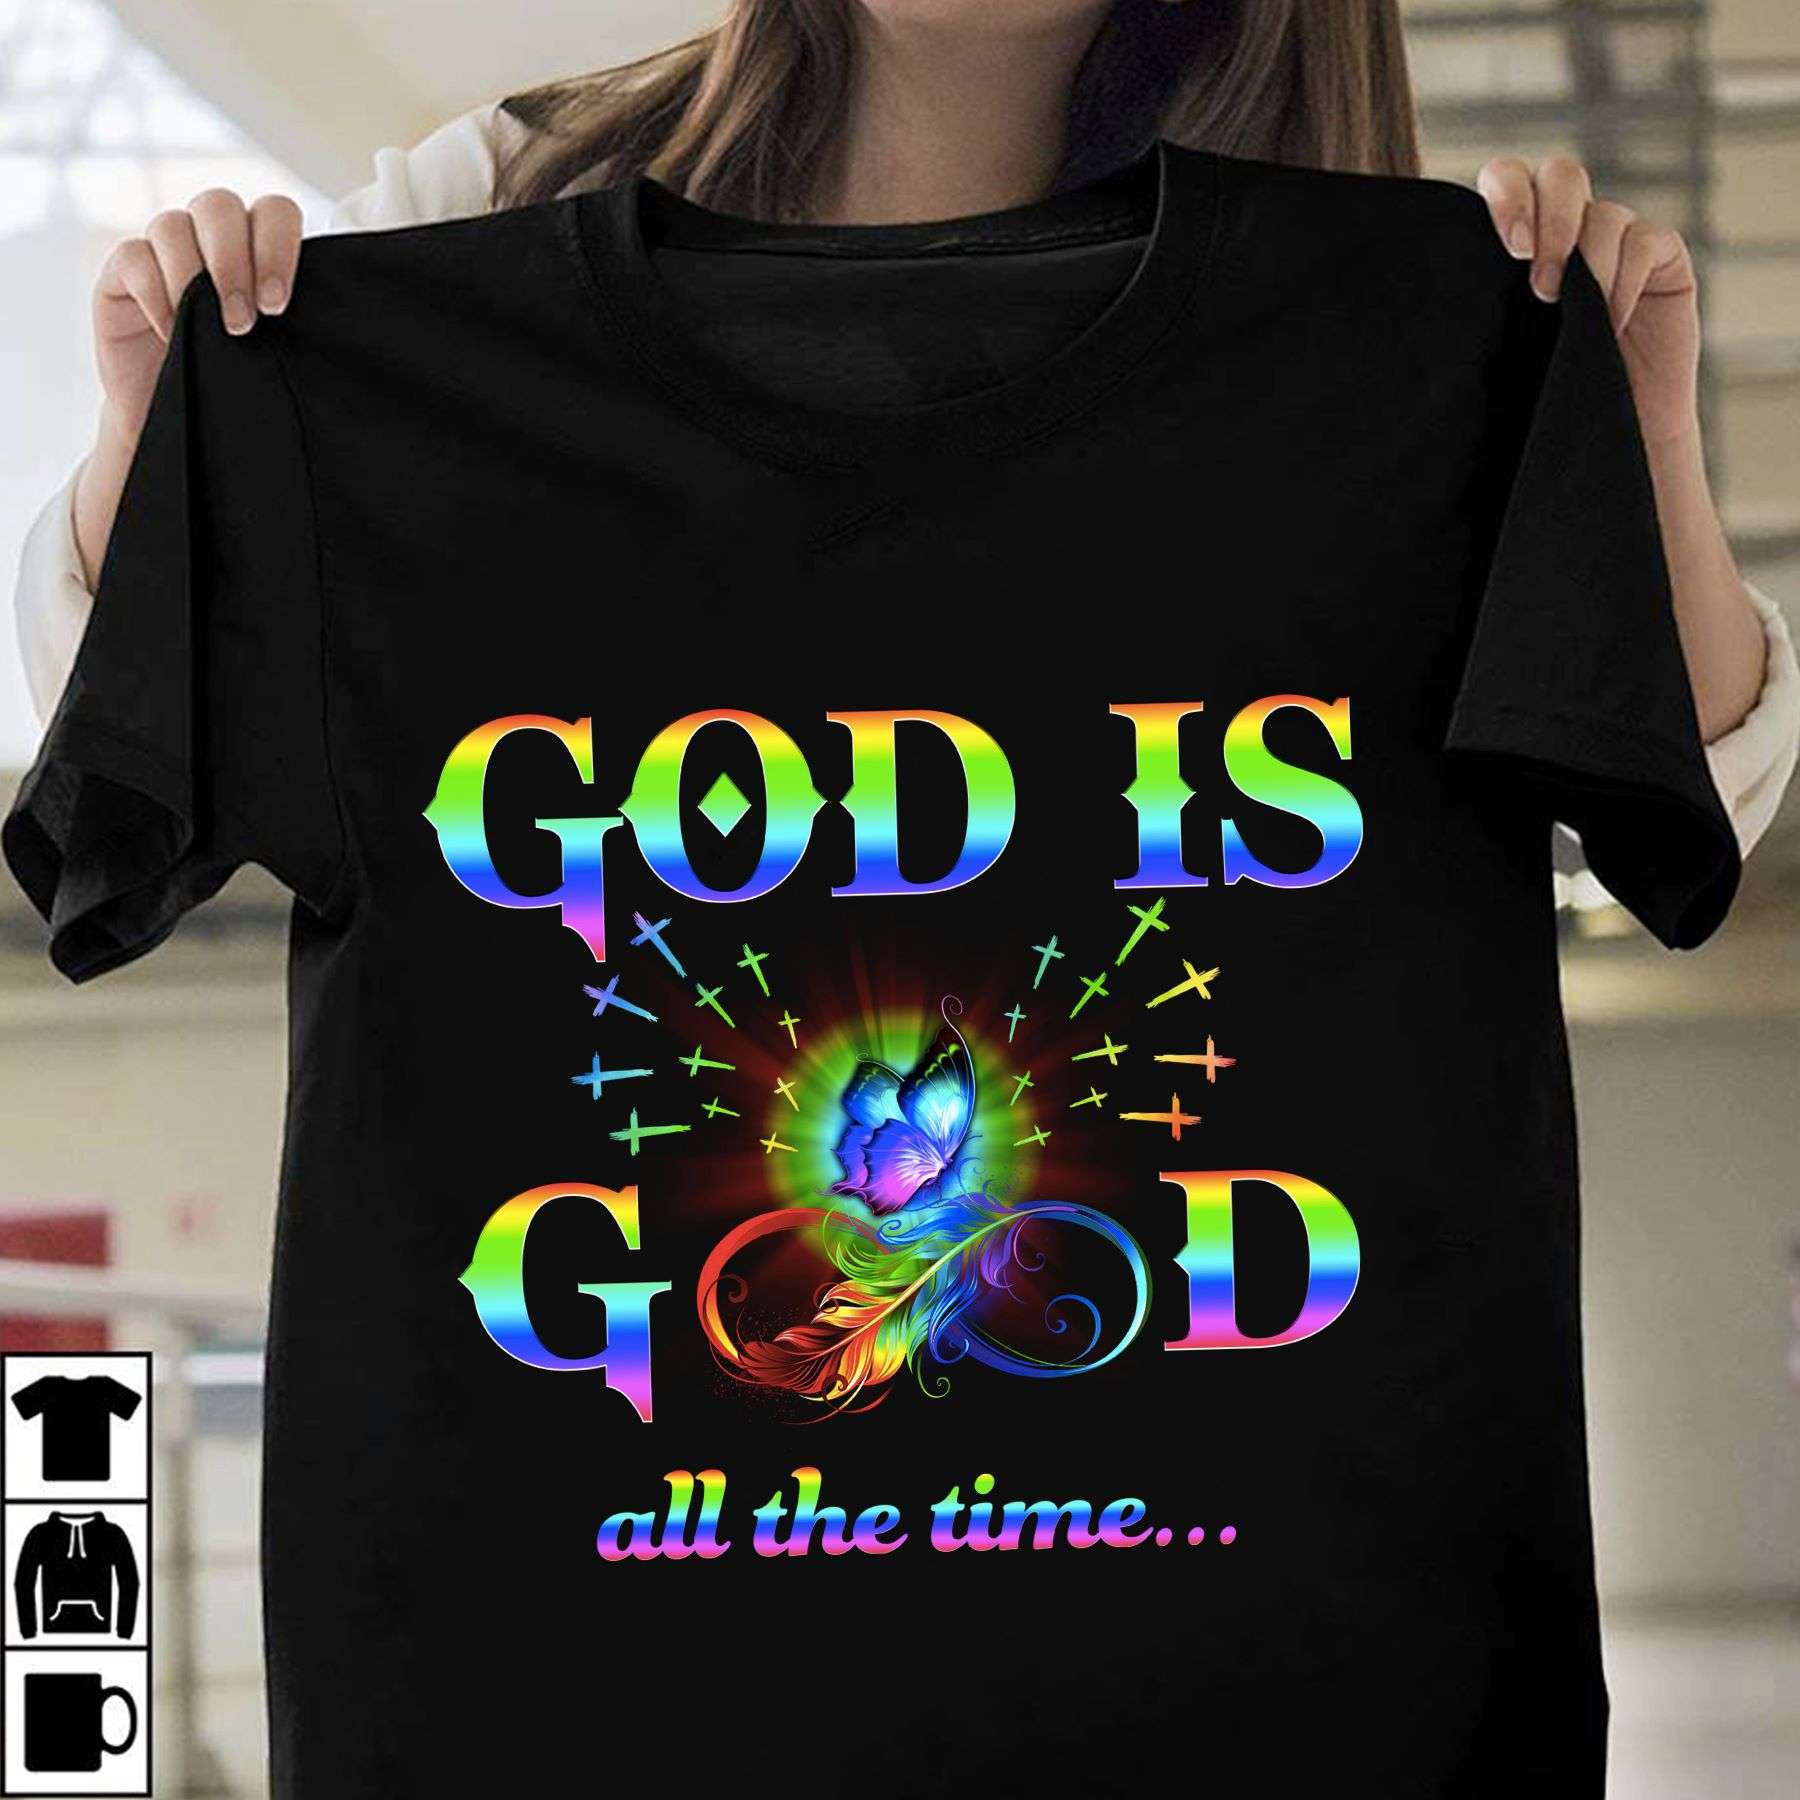 God is good all the time - Autism Awareness